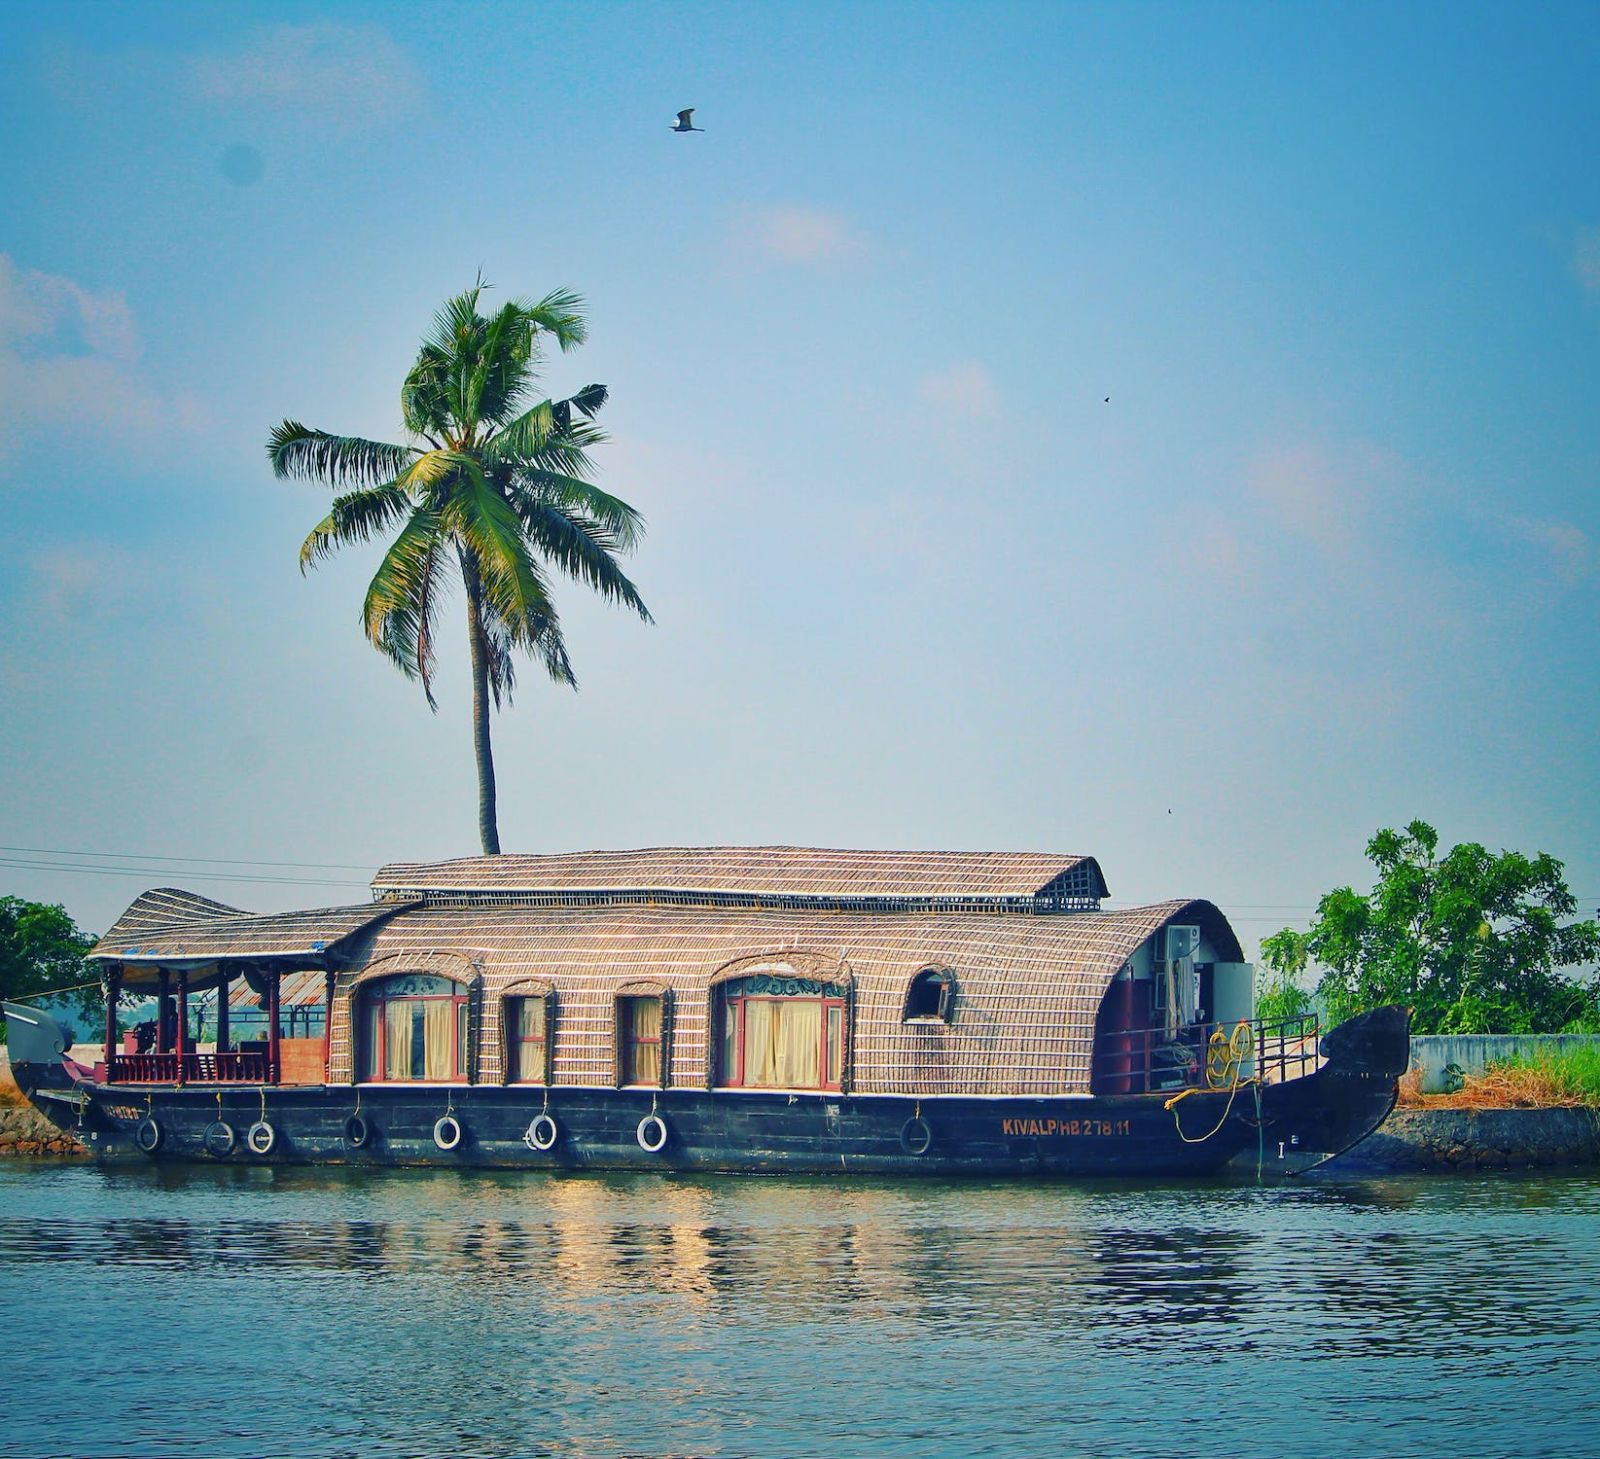 Boat house on a water body with plan tree and greenery in the background